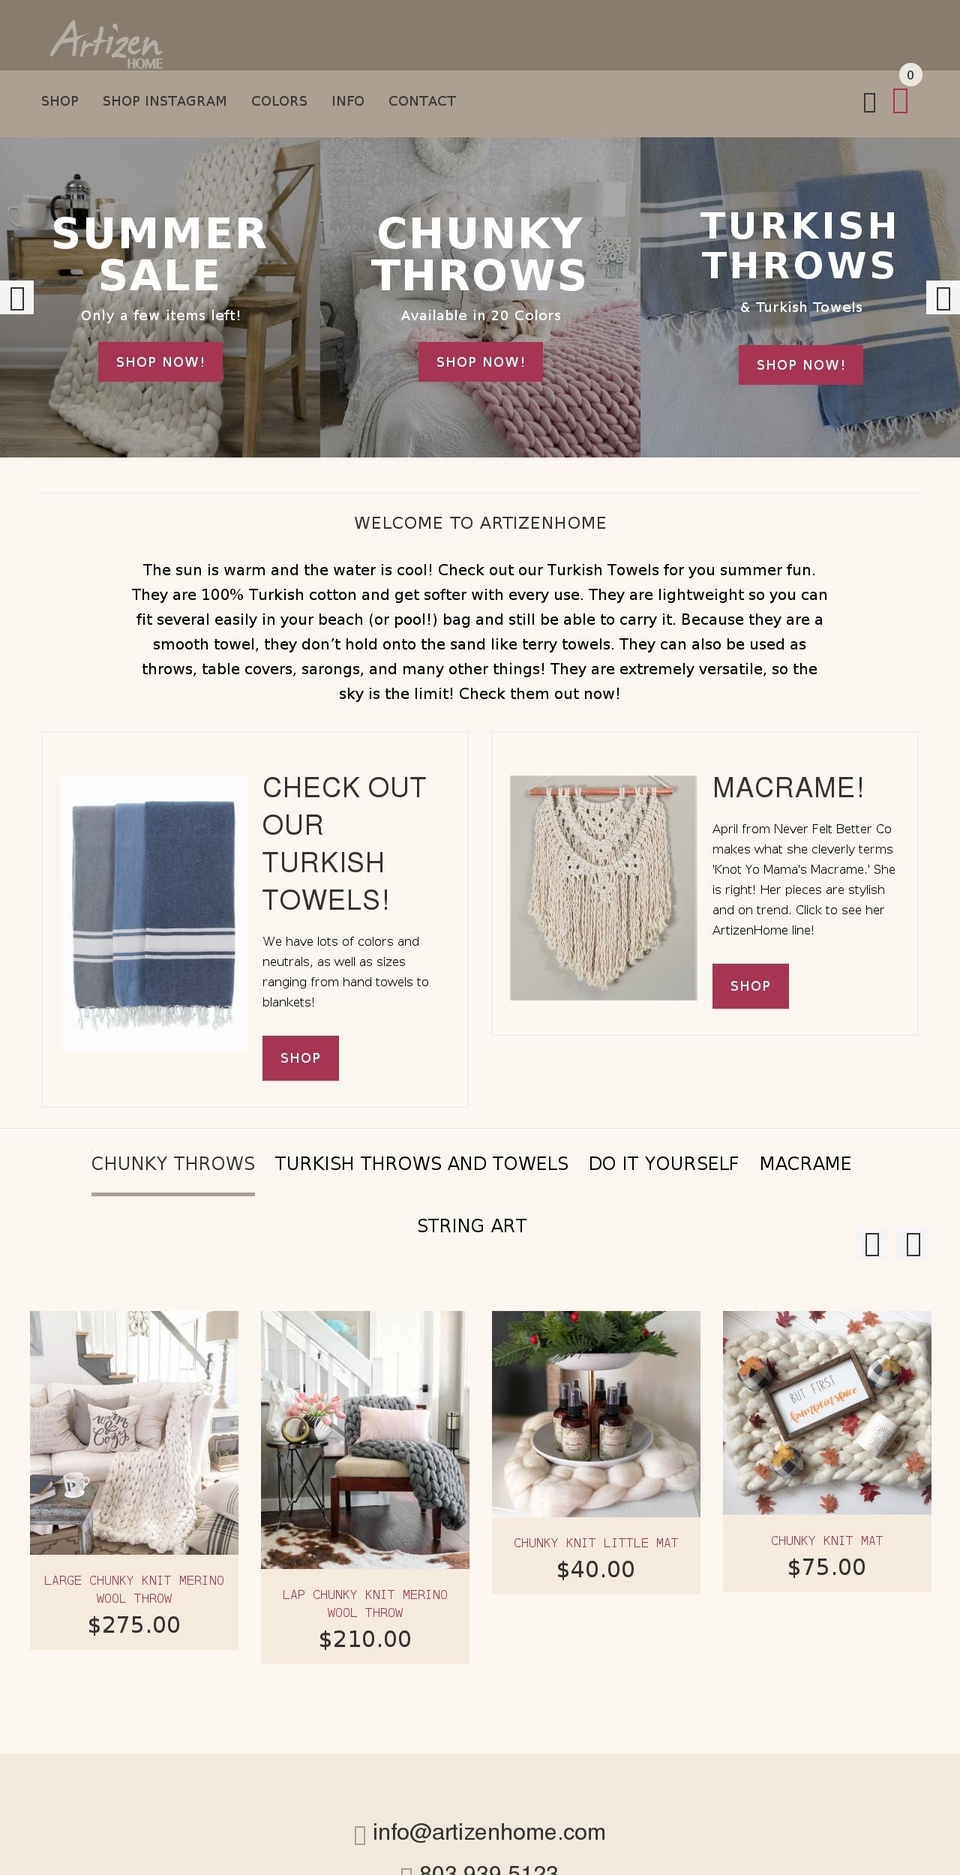 yourstore-v2-1-5 Shopify theme site example superchunkyyarn.org